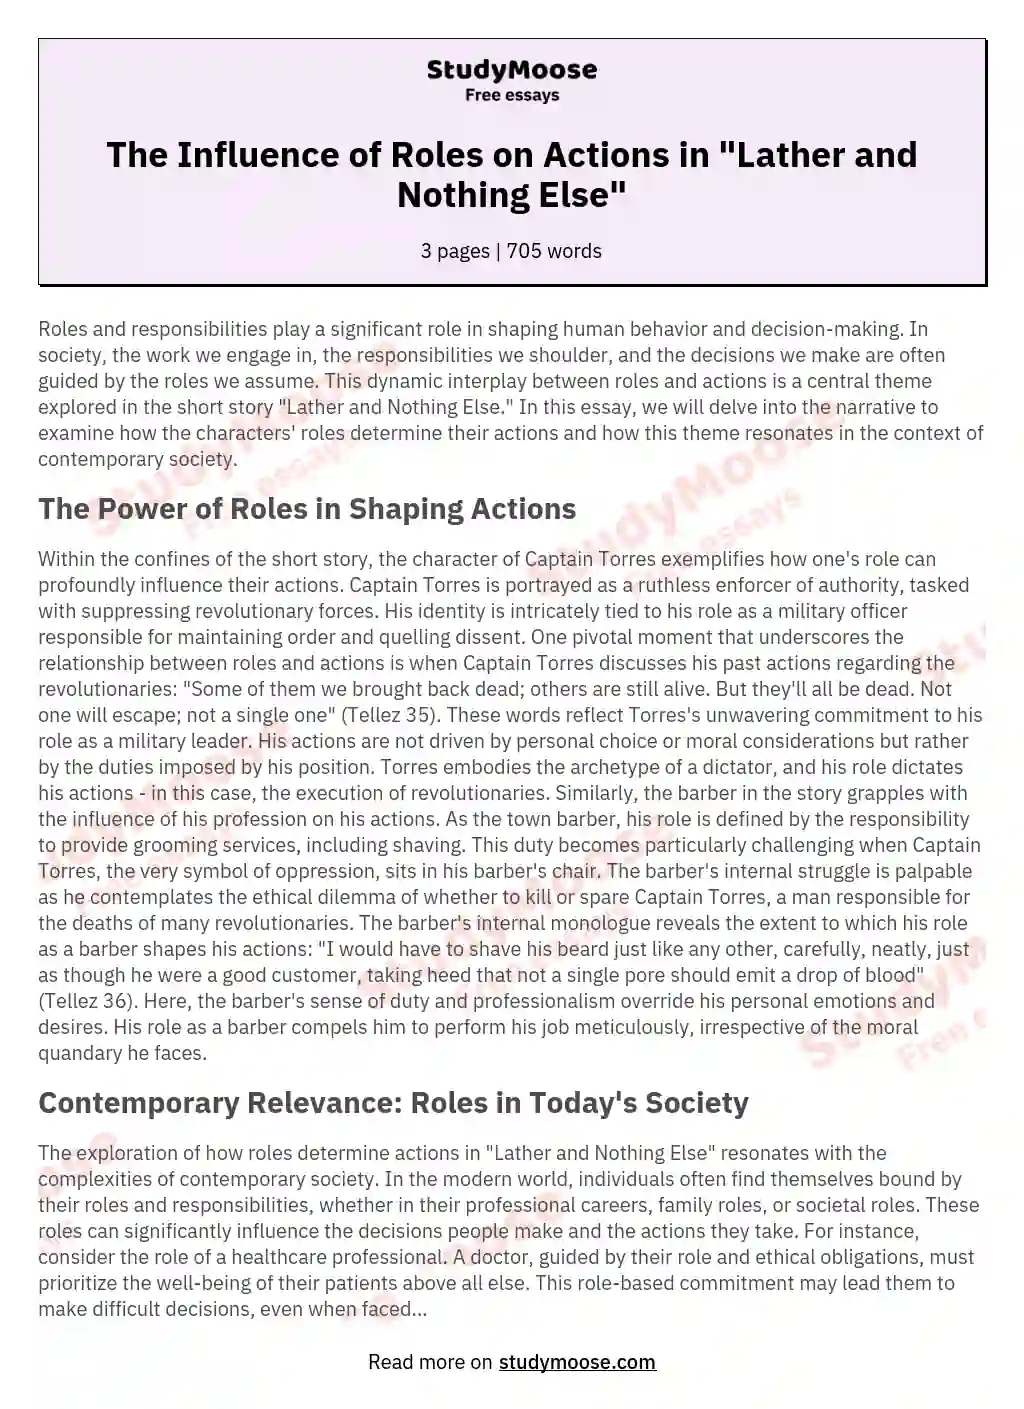 The Influence of Roles on Actions in "Lather and Nothing Else" essay